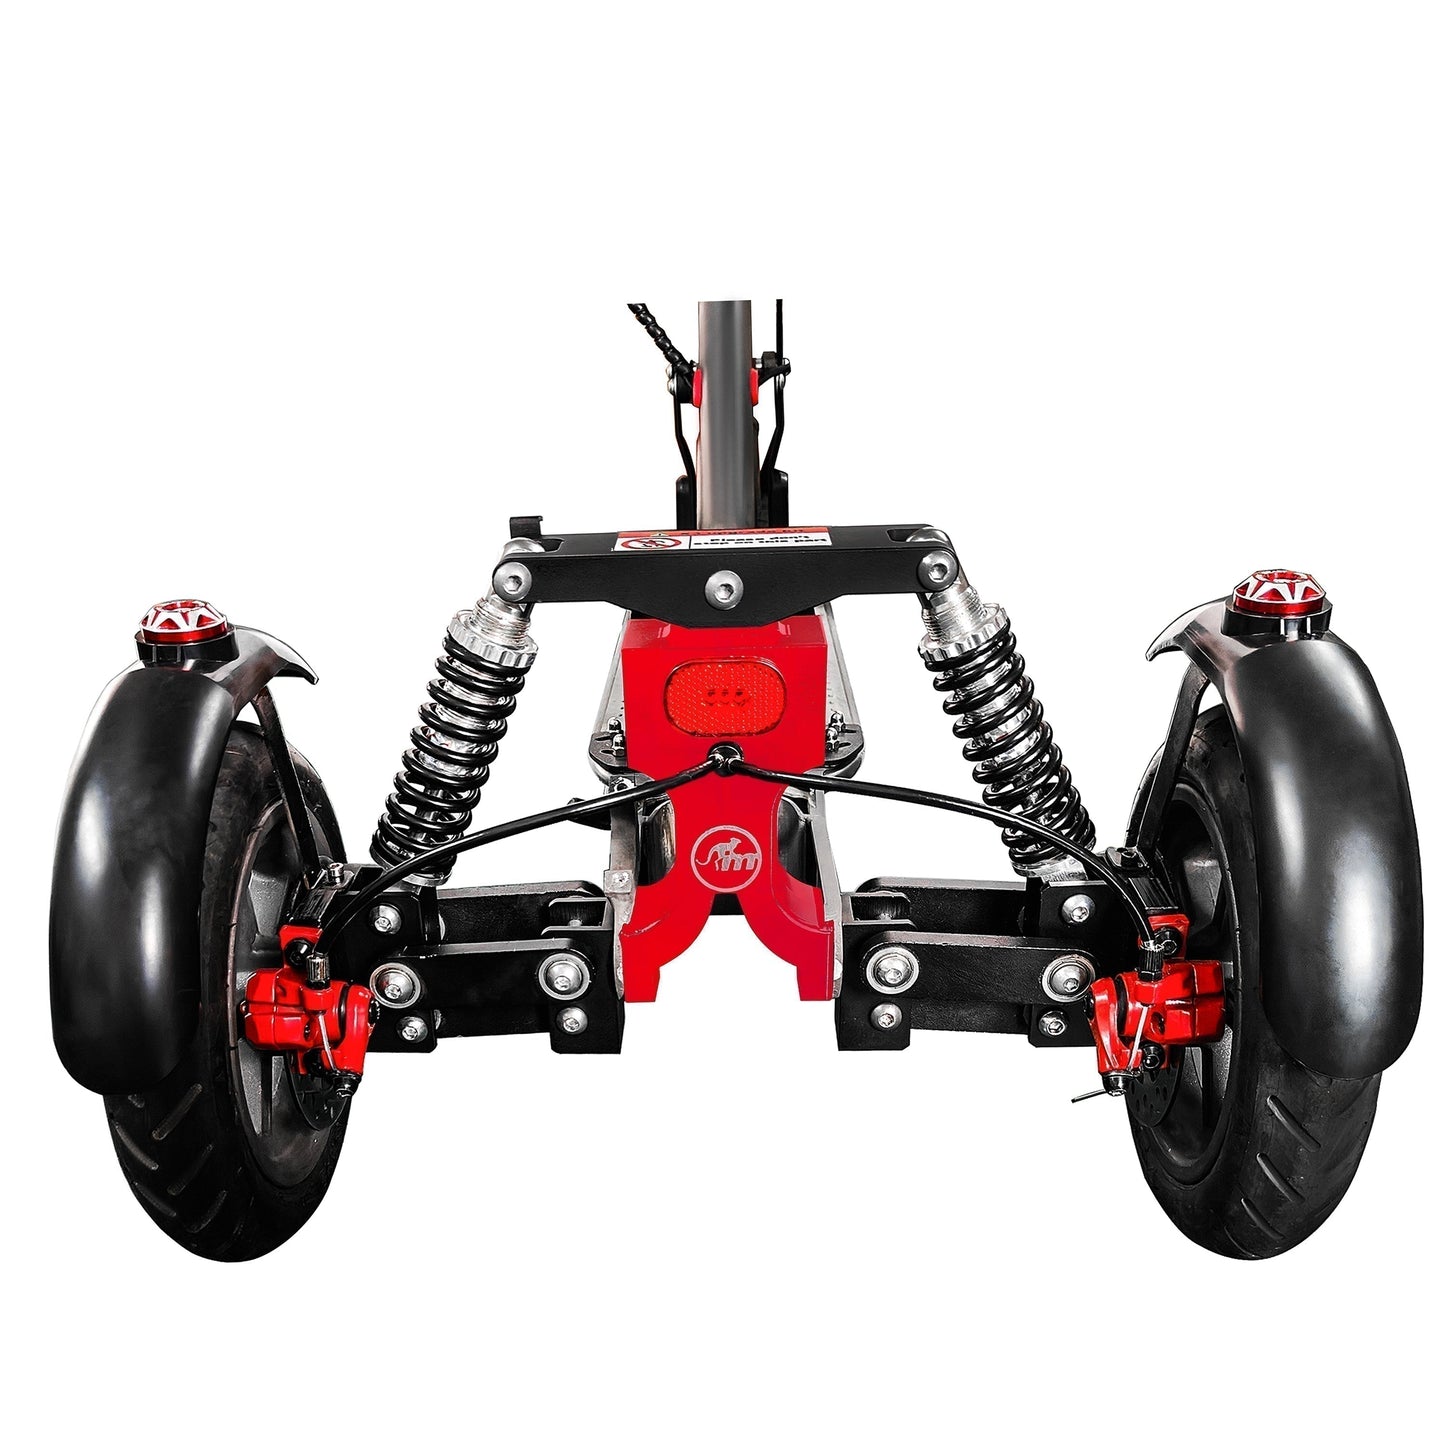 Monorim X3 upgrade kit to be Three wheels special for Hiboy s2 frames